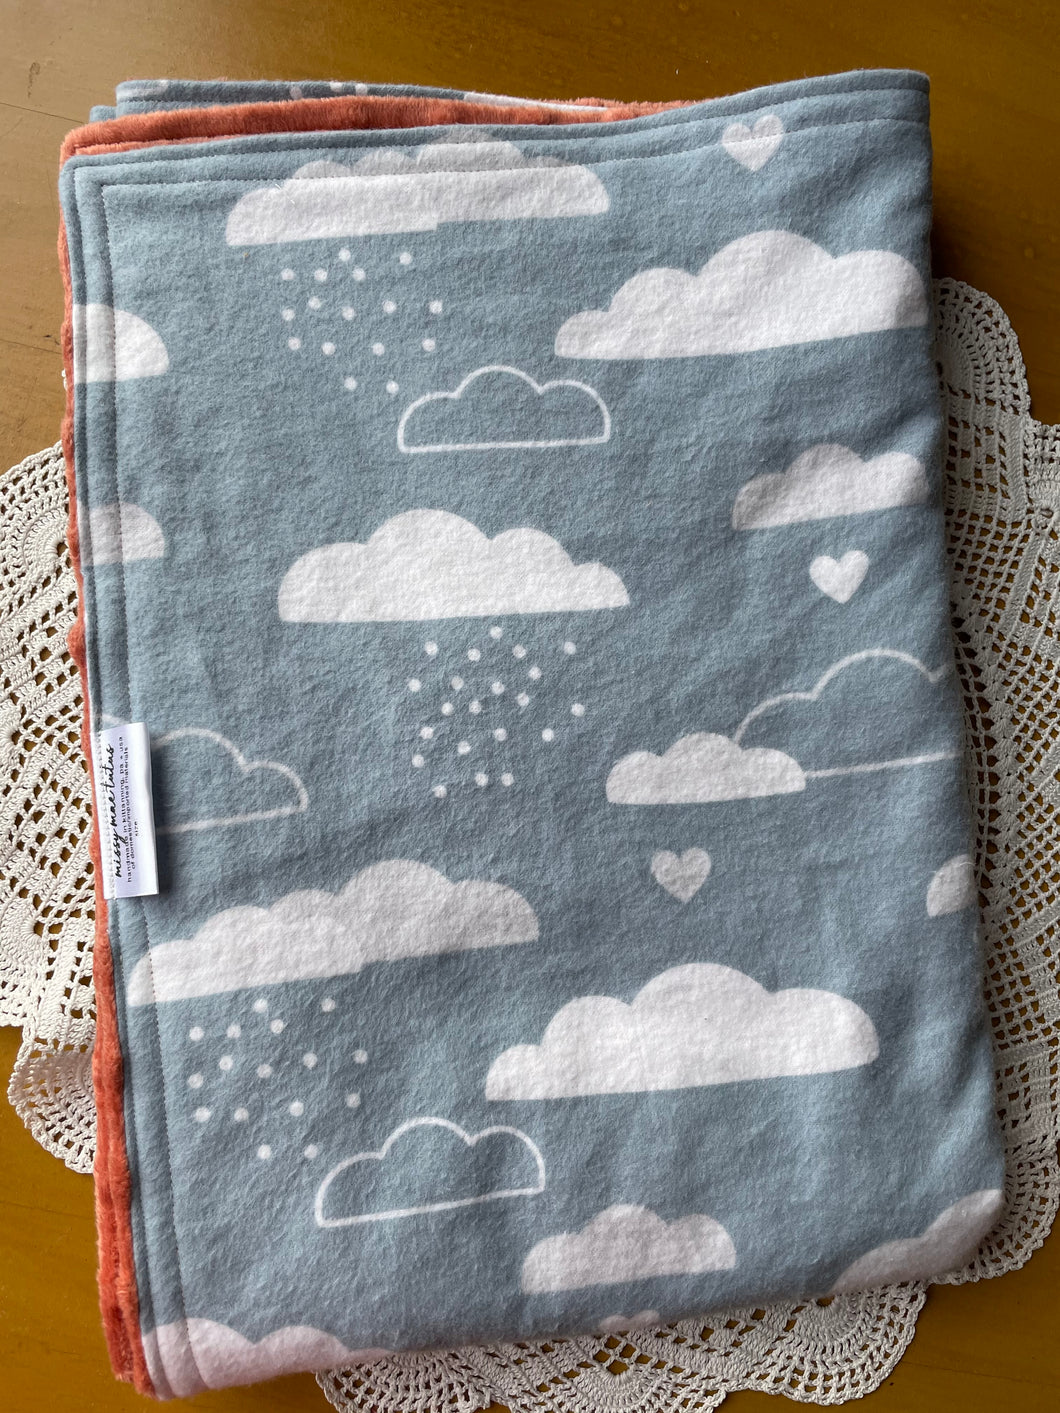 Cloud Flannel and Minky Blanket